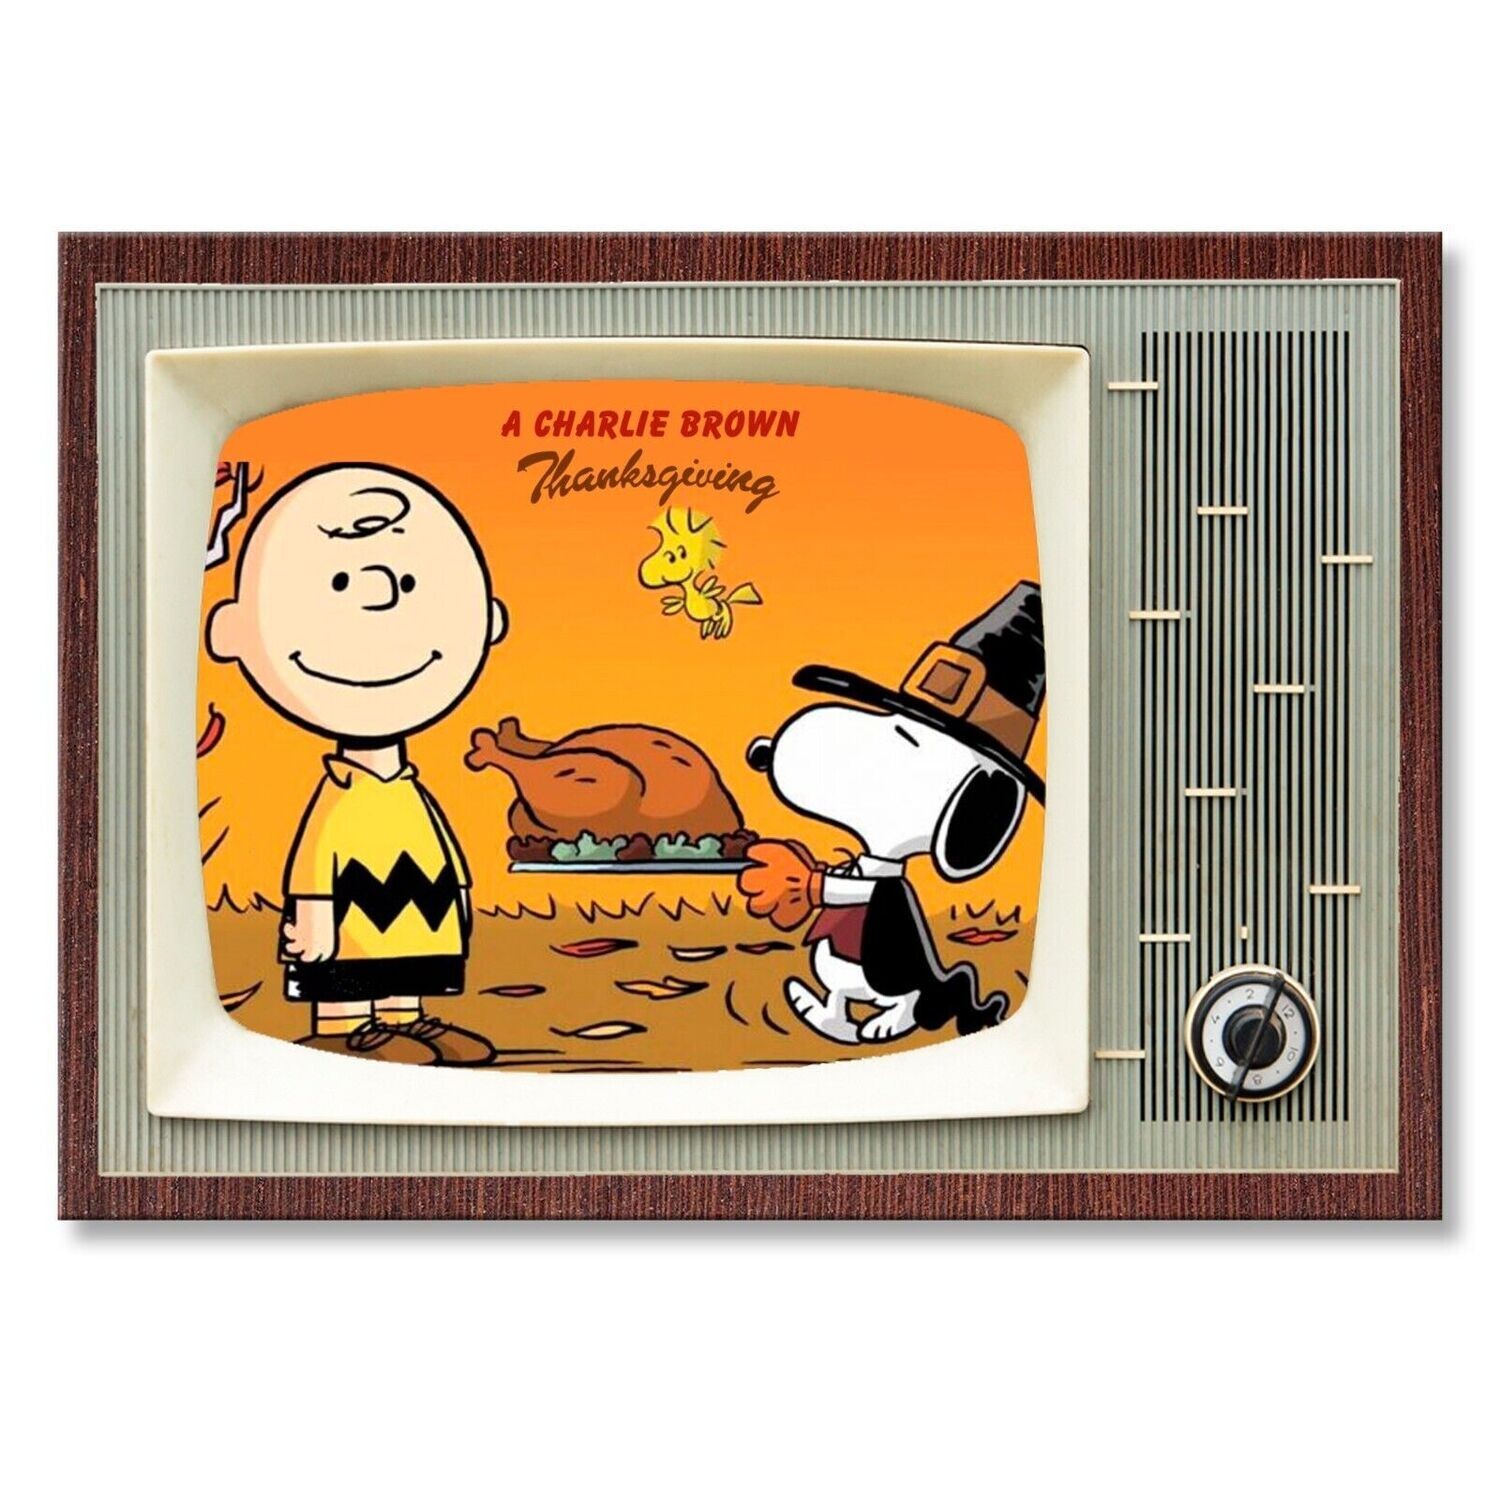 Peanuts - A Charlie Brown Thanksgiving Large Metal TV Magnet